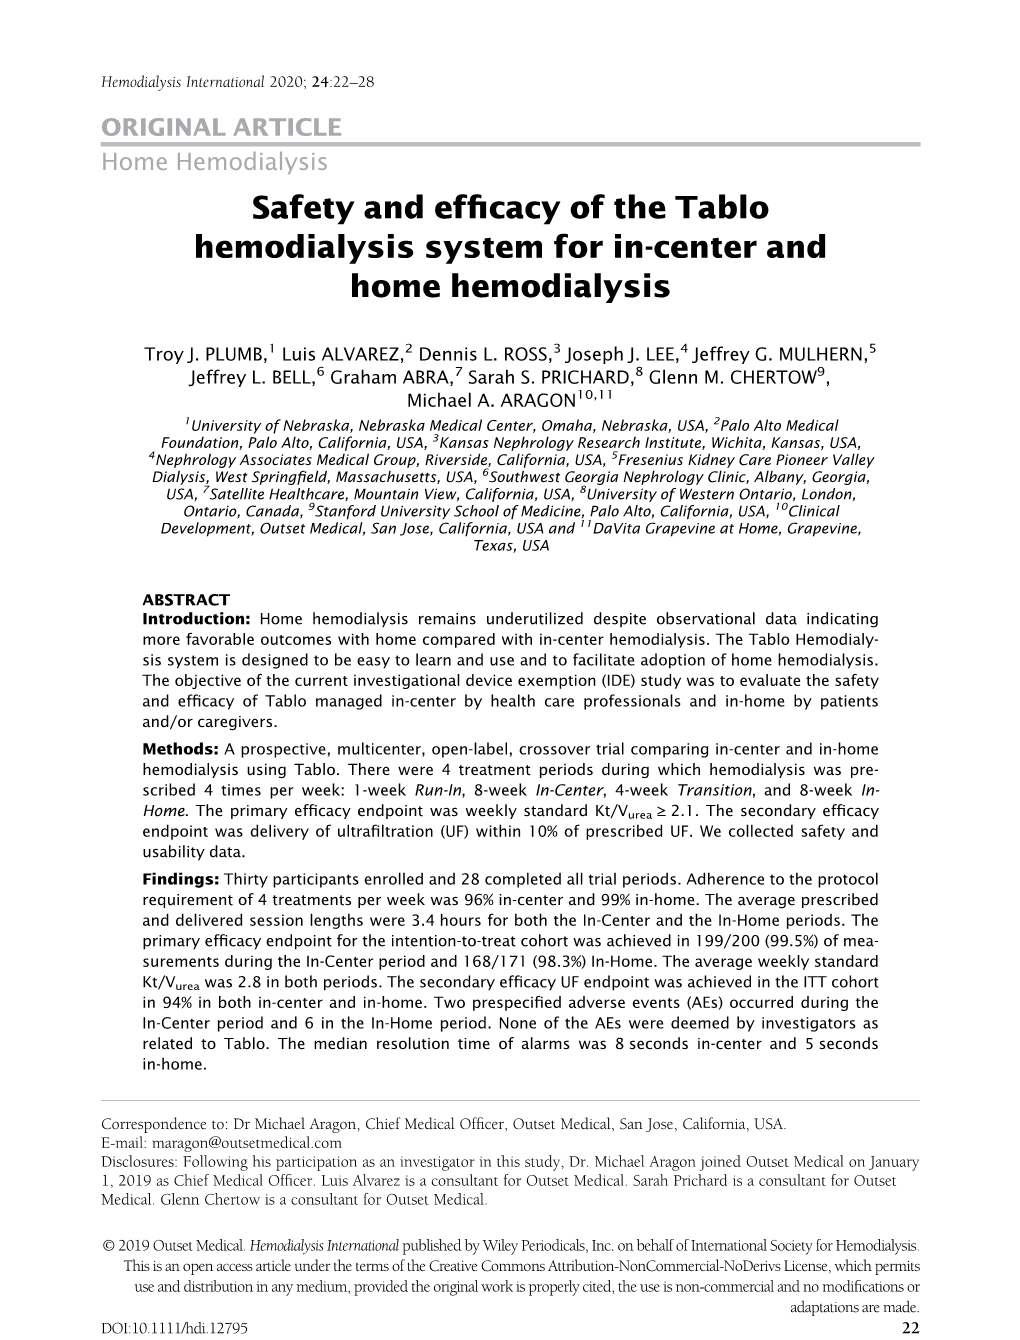 Safety and Efficacy of the Tablo ® Hemodialysis System for In-Center